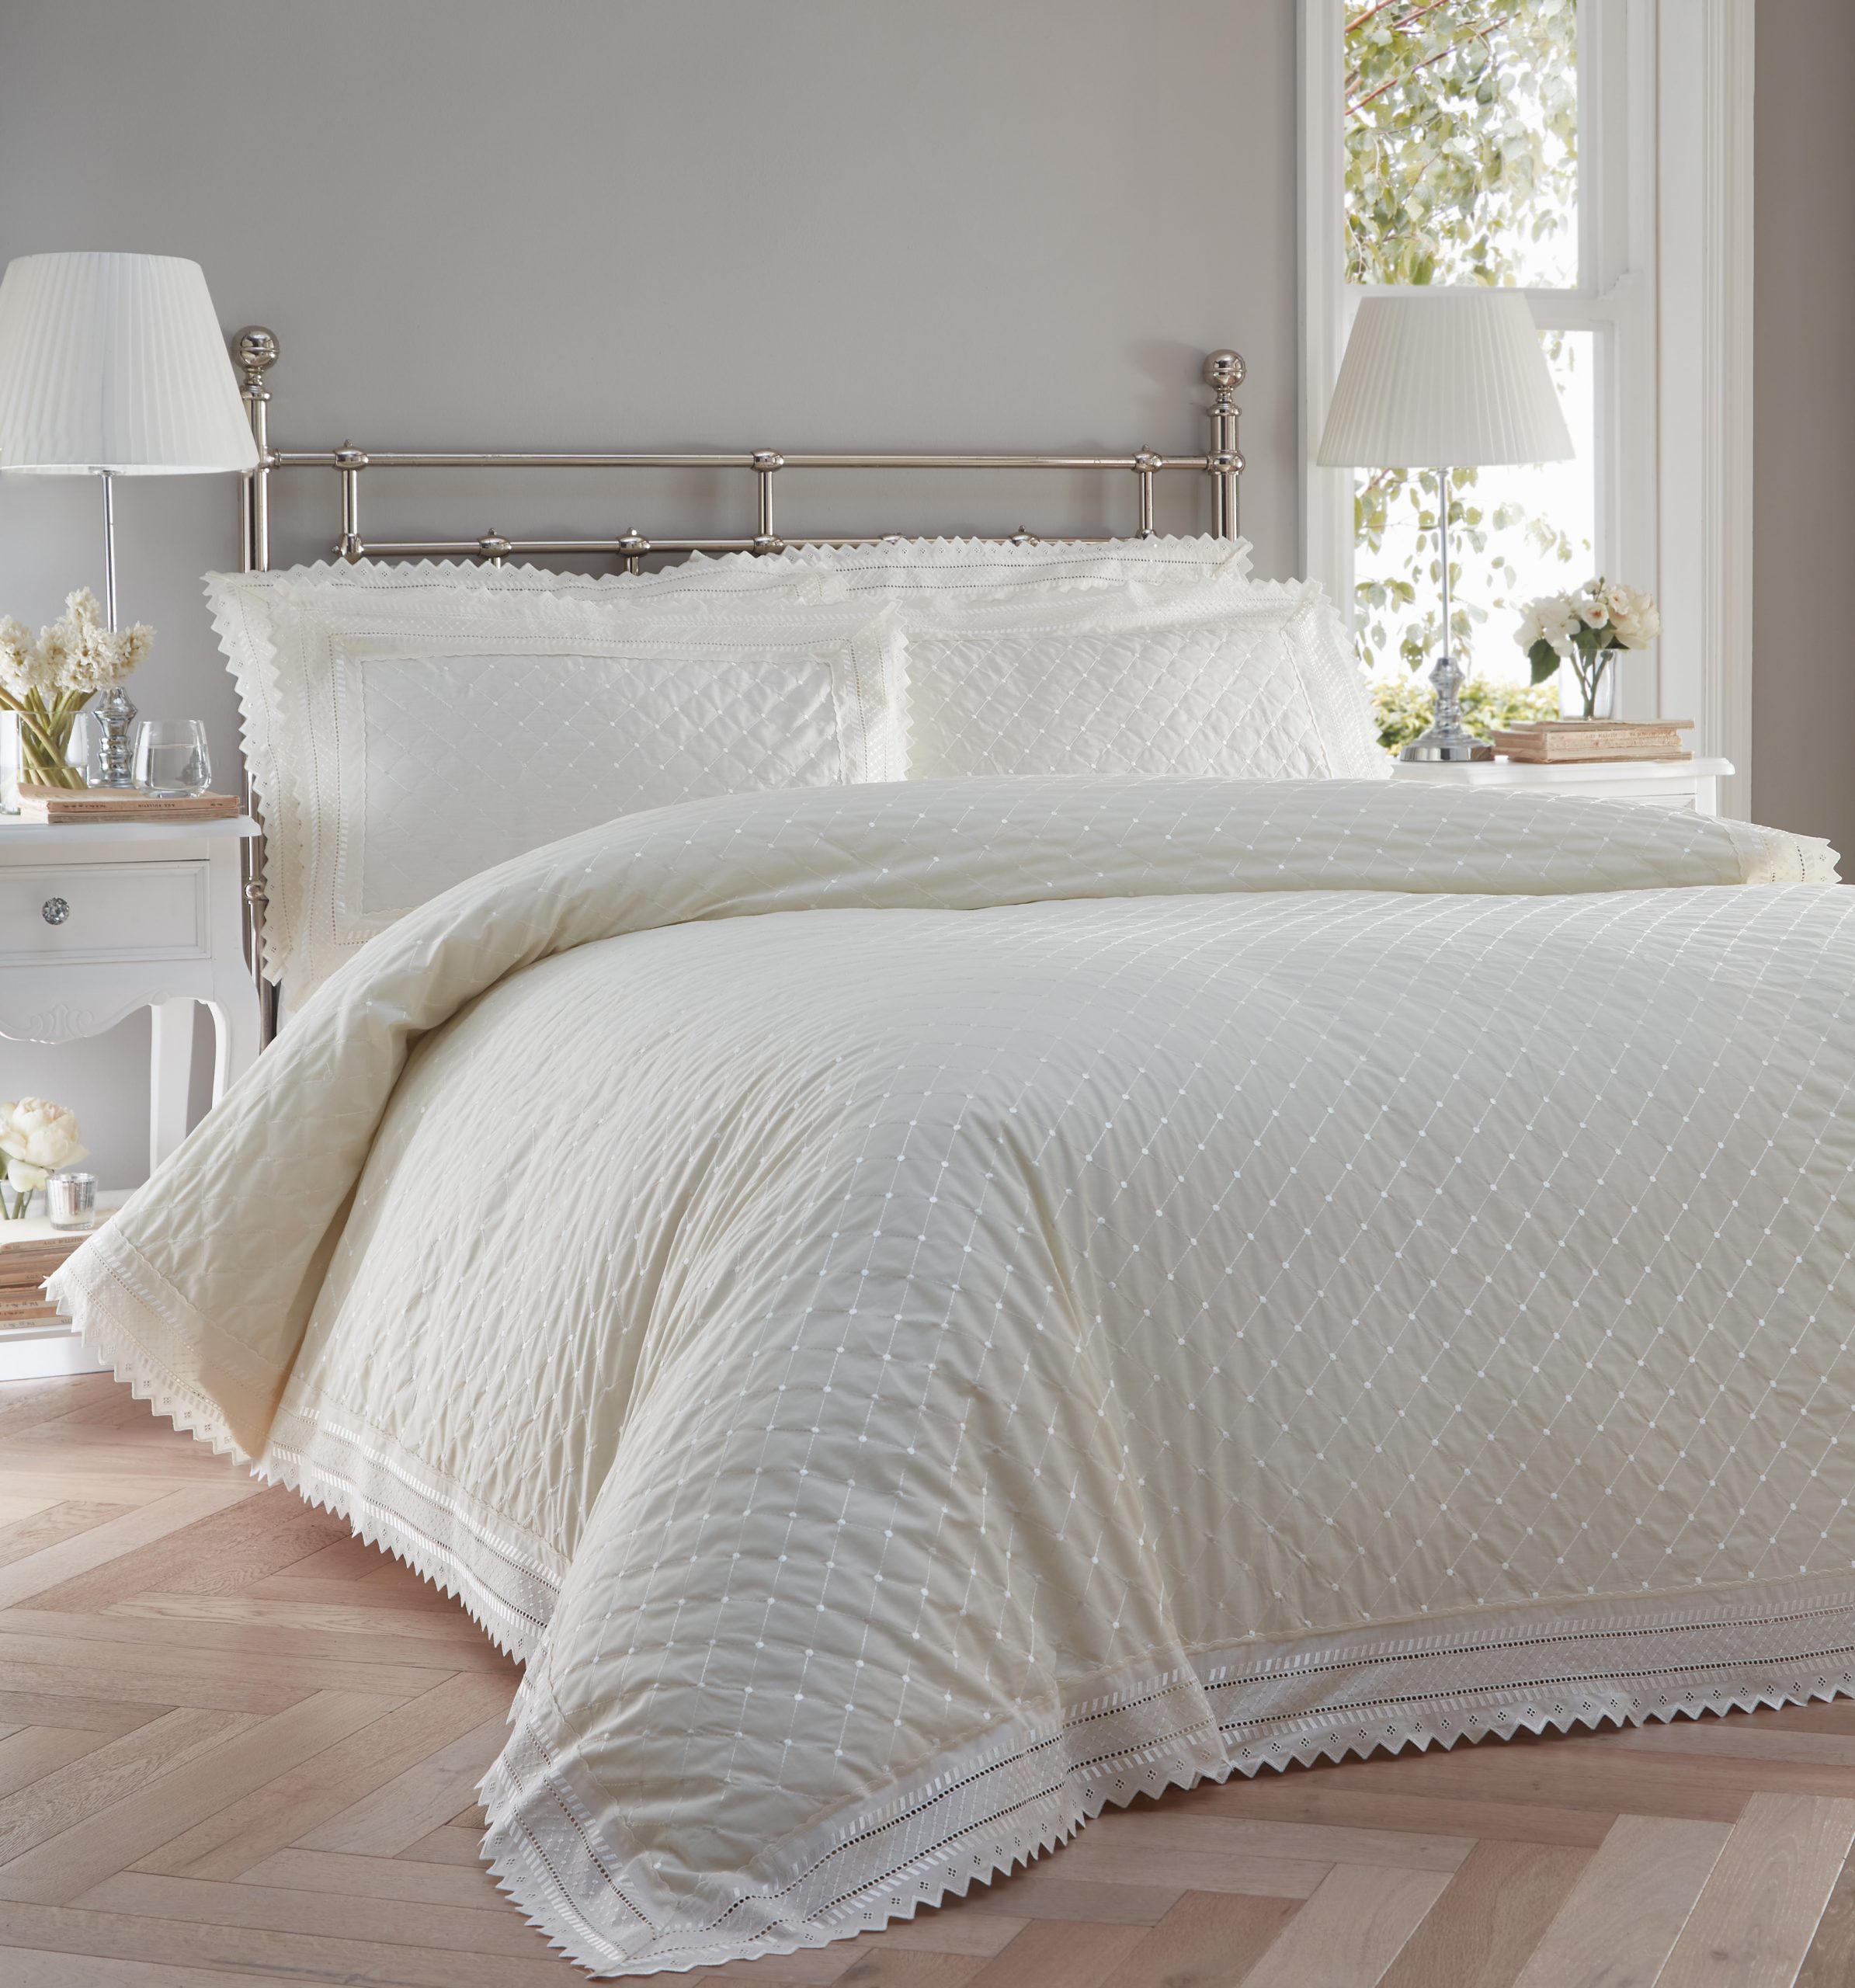 Broderie Anglaise Bedding Cream In, How To Put A Super King Duvet Cover On Queen Comforters